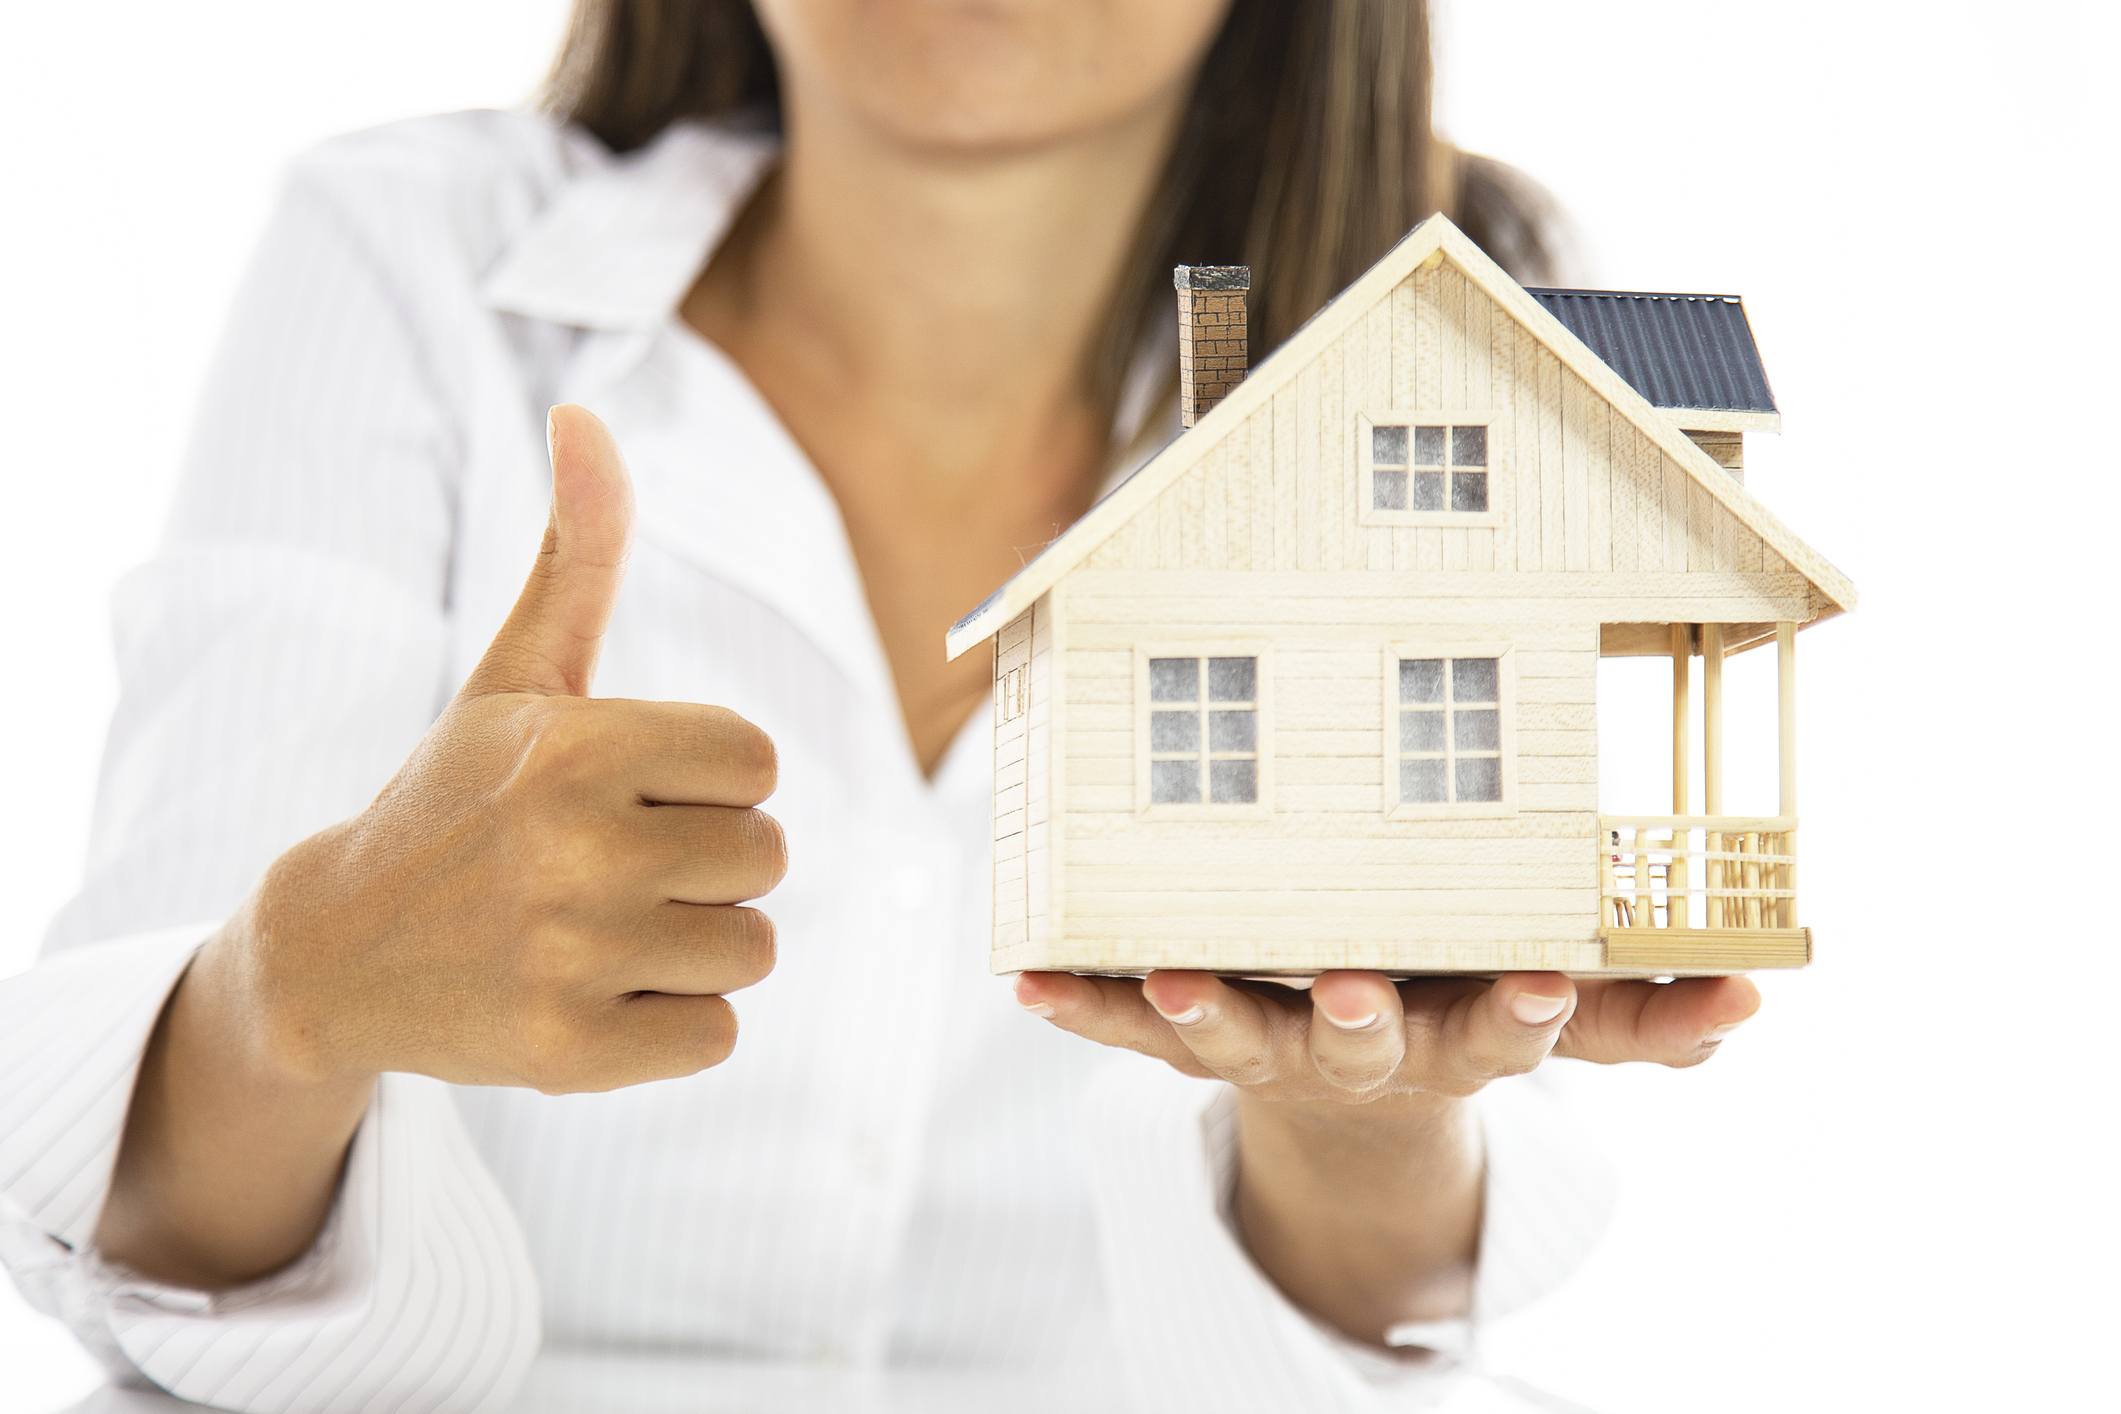 How To Choose the Best Homeowners Insurance Policy